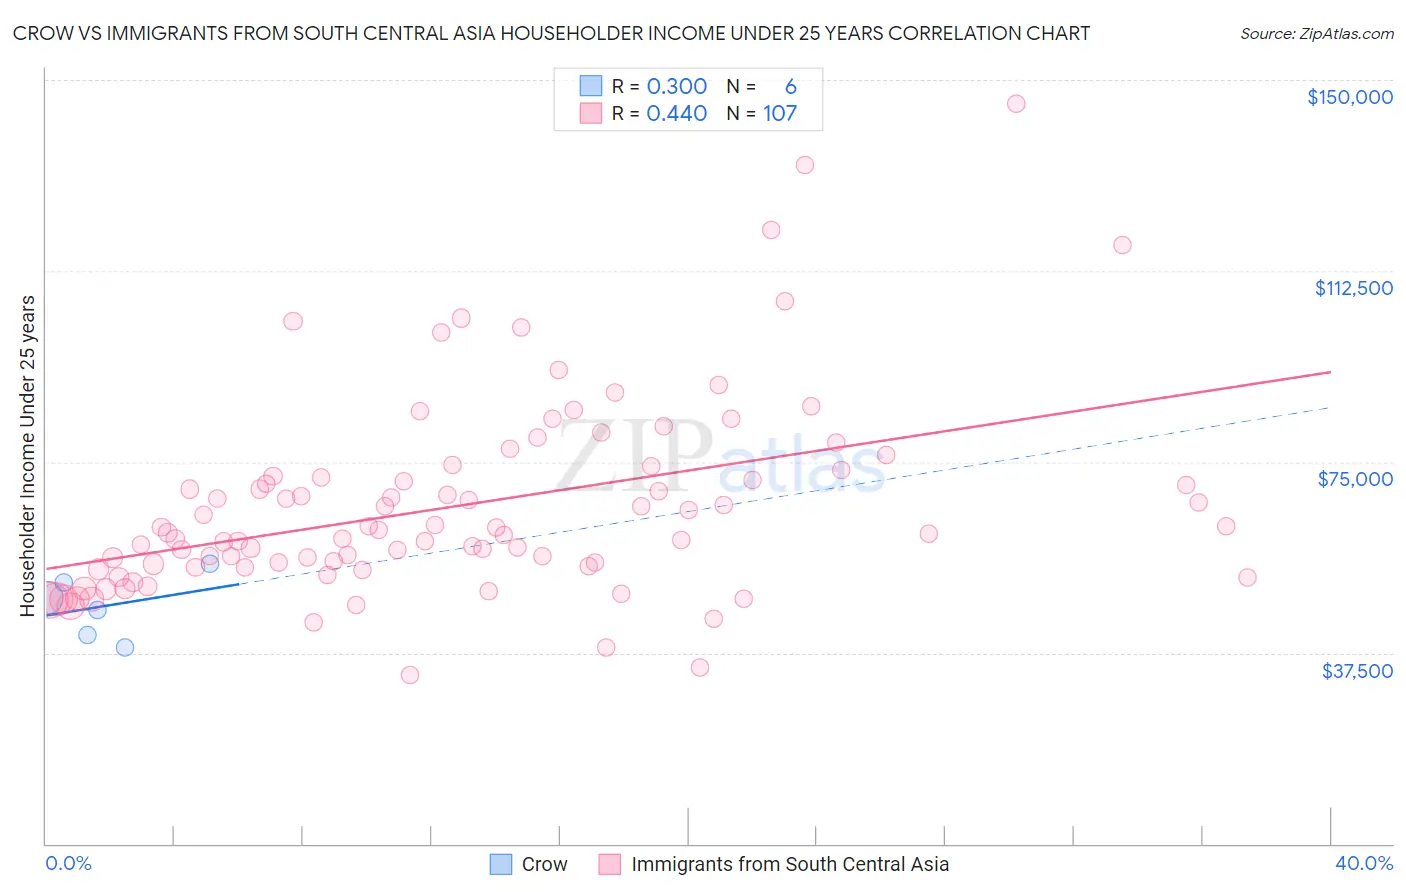 Crow vs Immigrants from South Central Asia Householder Income Under 25 years